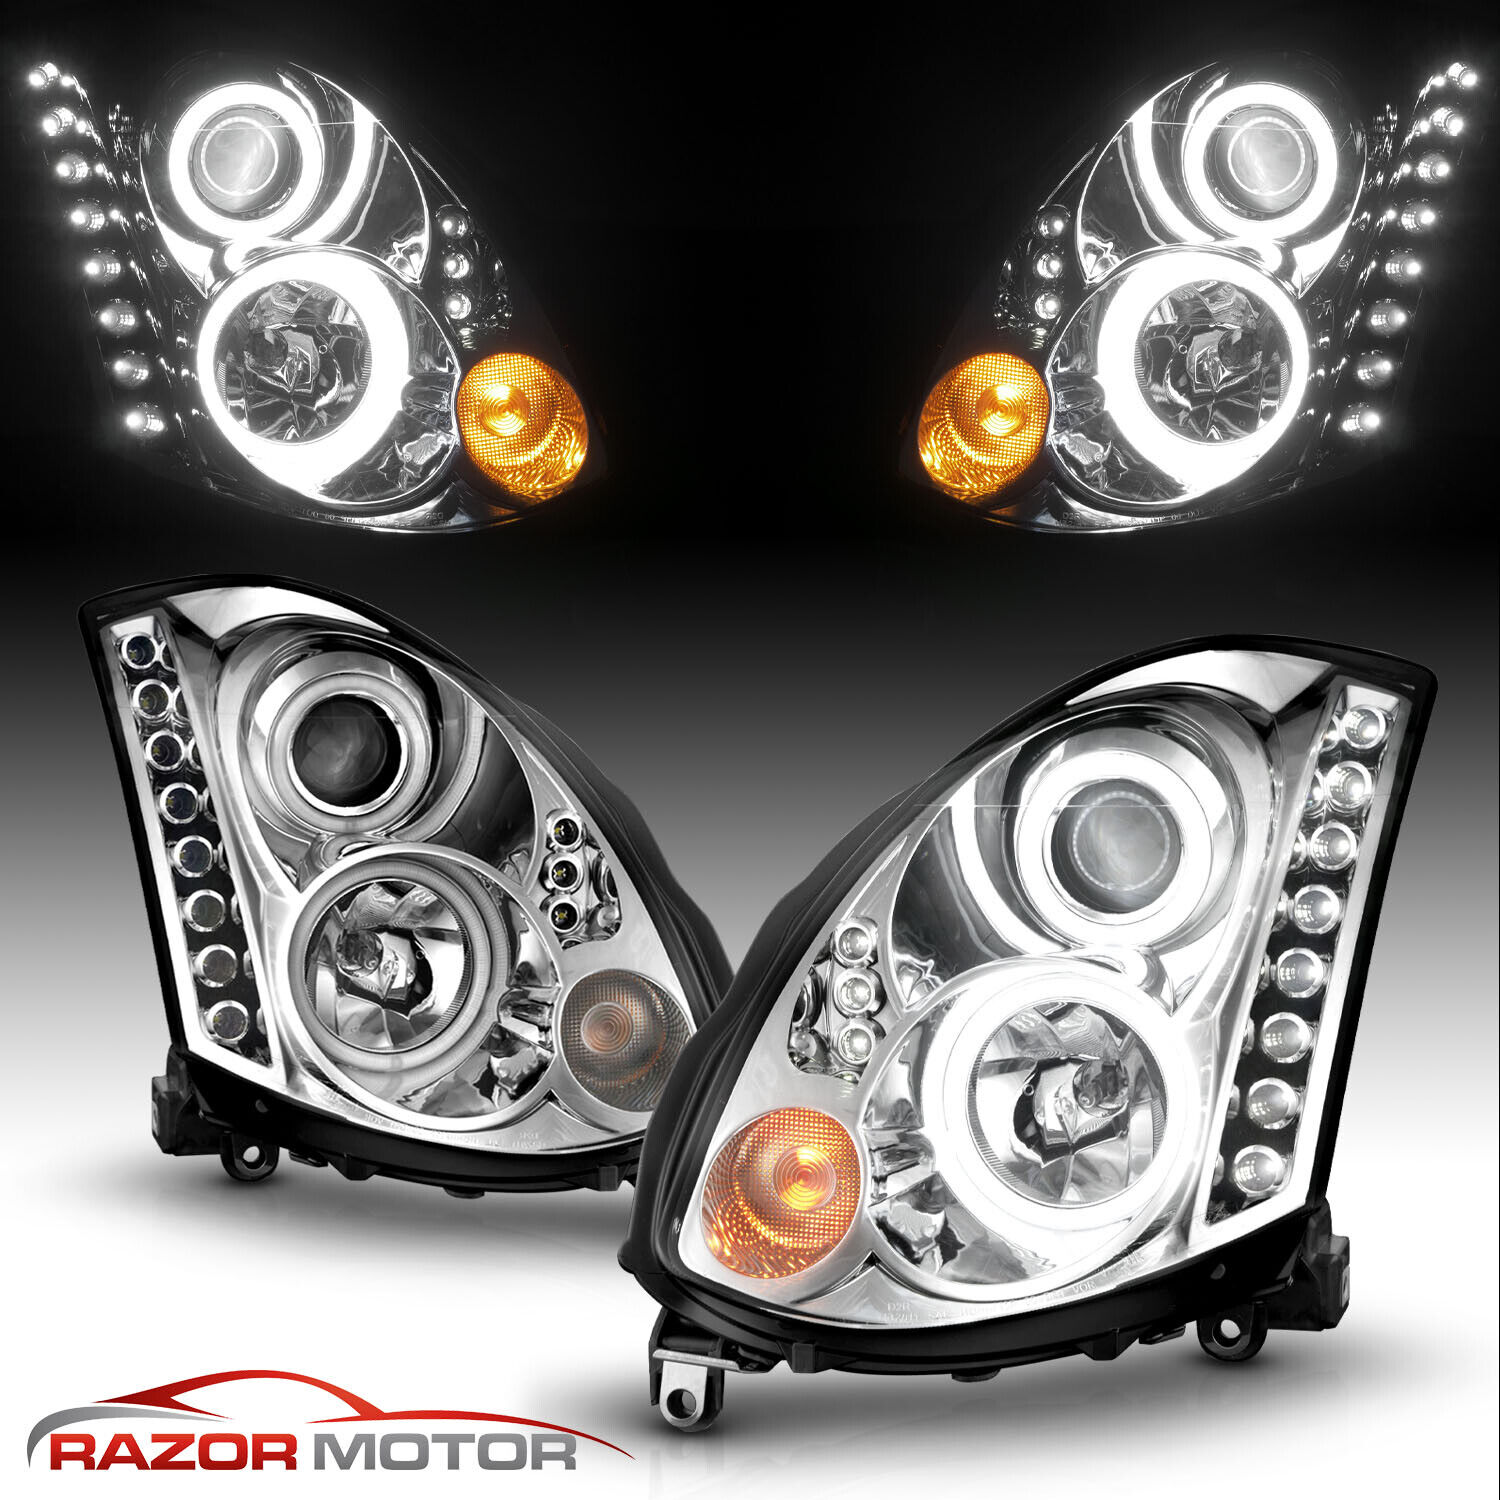 For 2003-2007 Replacement Chrome Projector Headlight Pair for Infiniti G35 Coupe